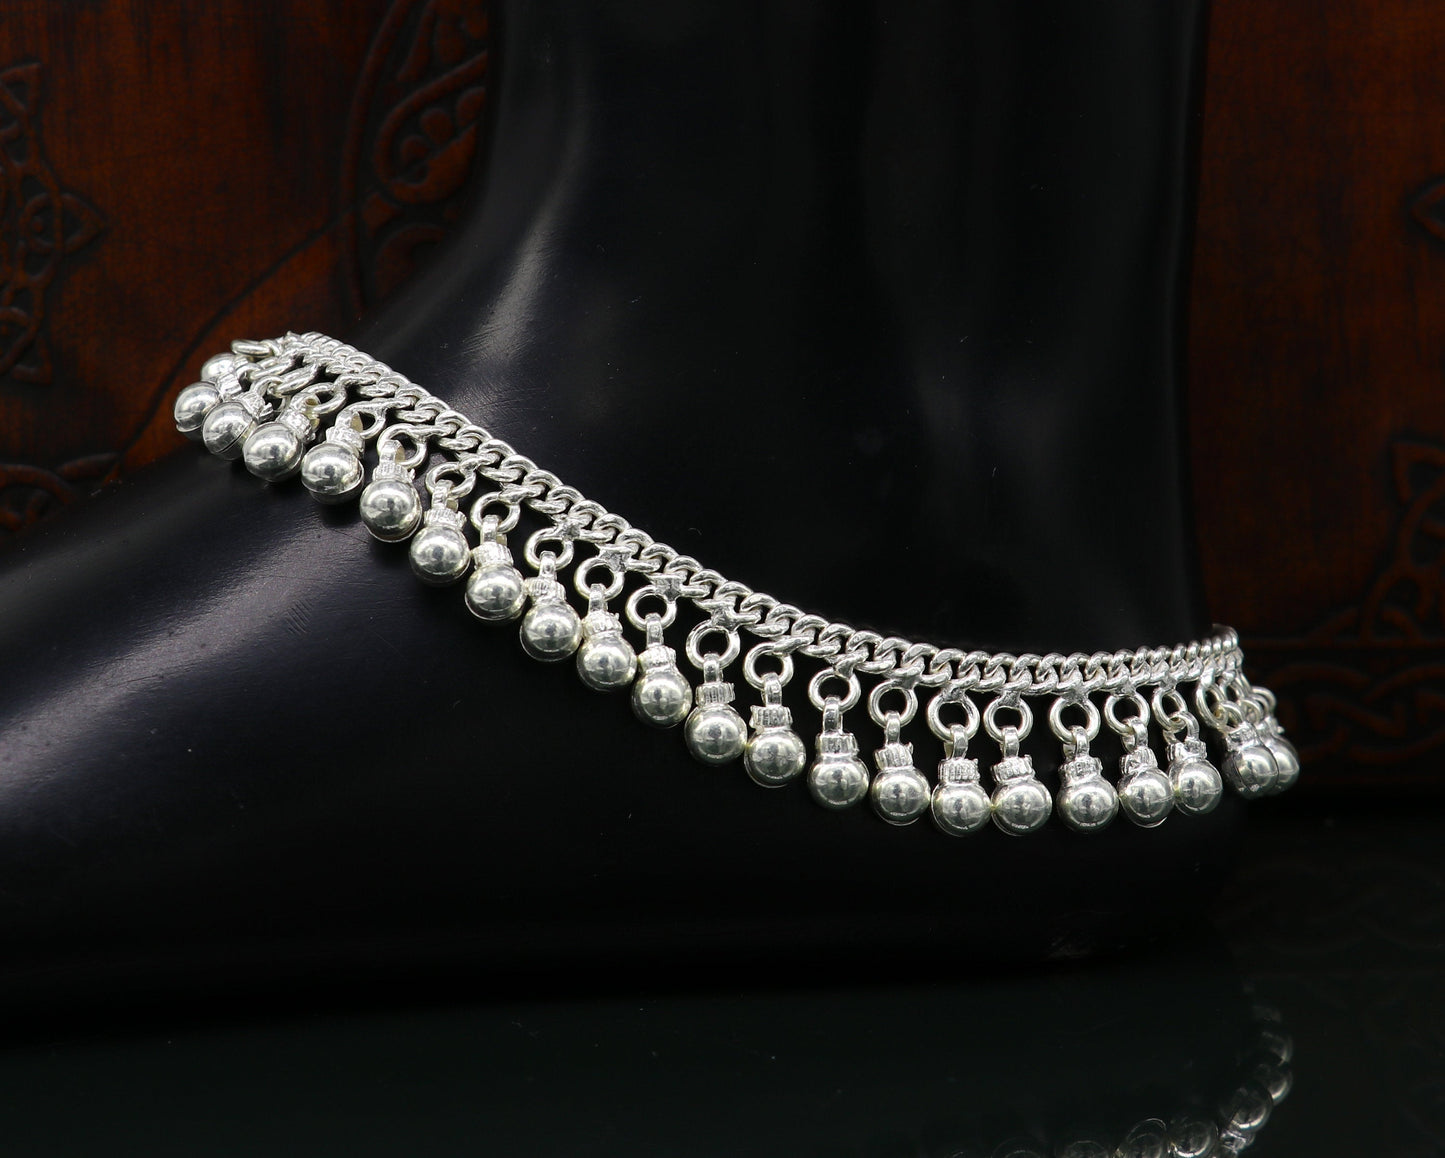 10.5" Vintage antique style sterling silver handmade solid chain ankle bracelet with amazing noisy jingle bells belly genuine jewelry ank379 - TRIBAL ORNAMENTS